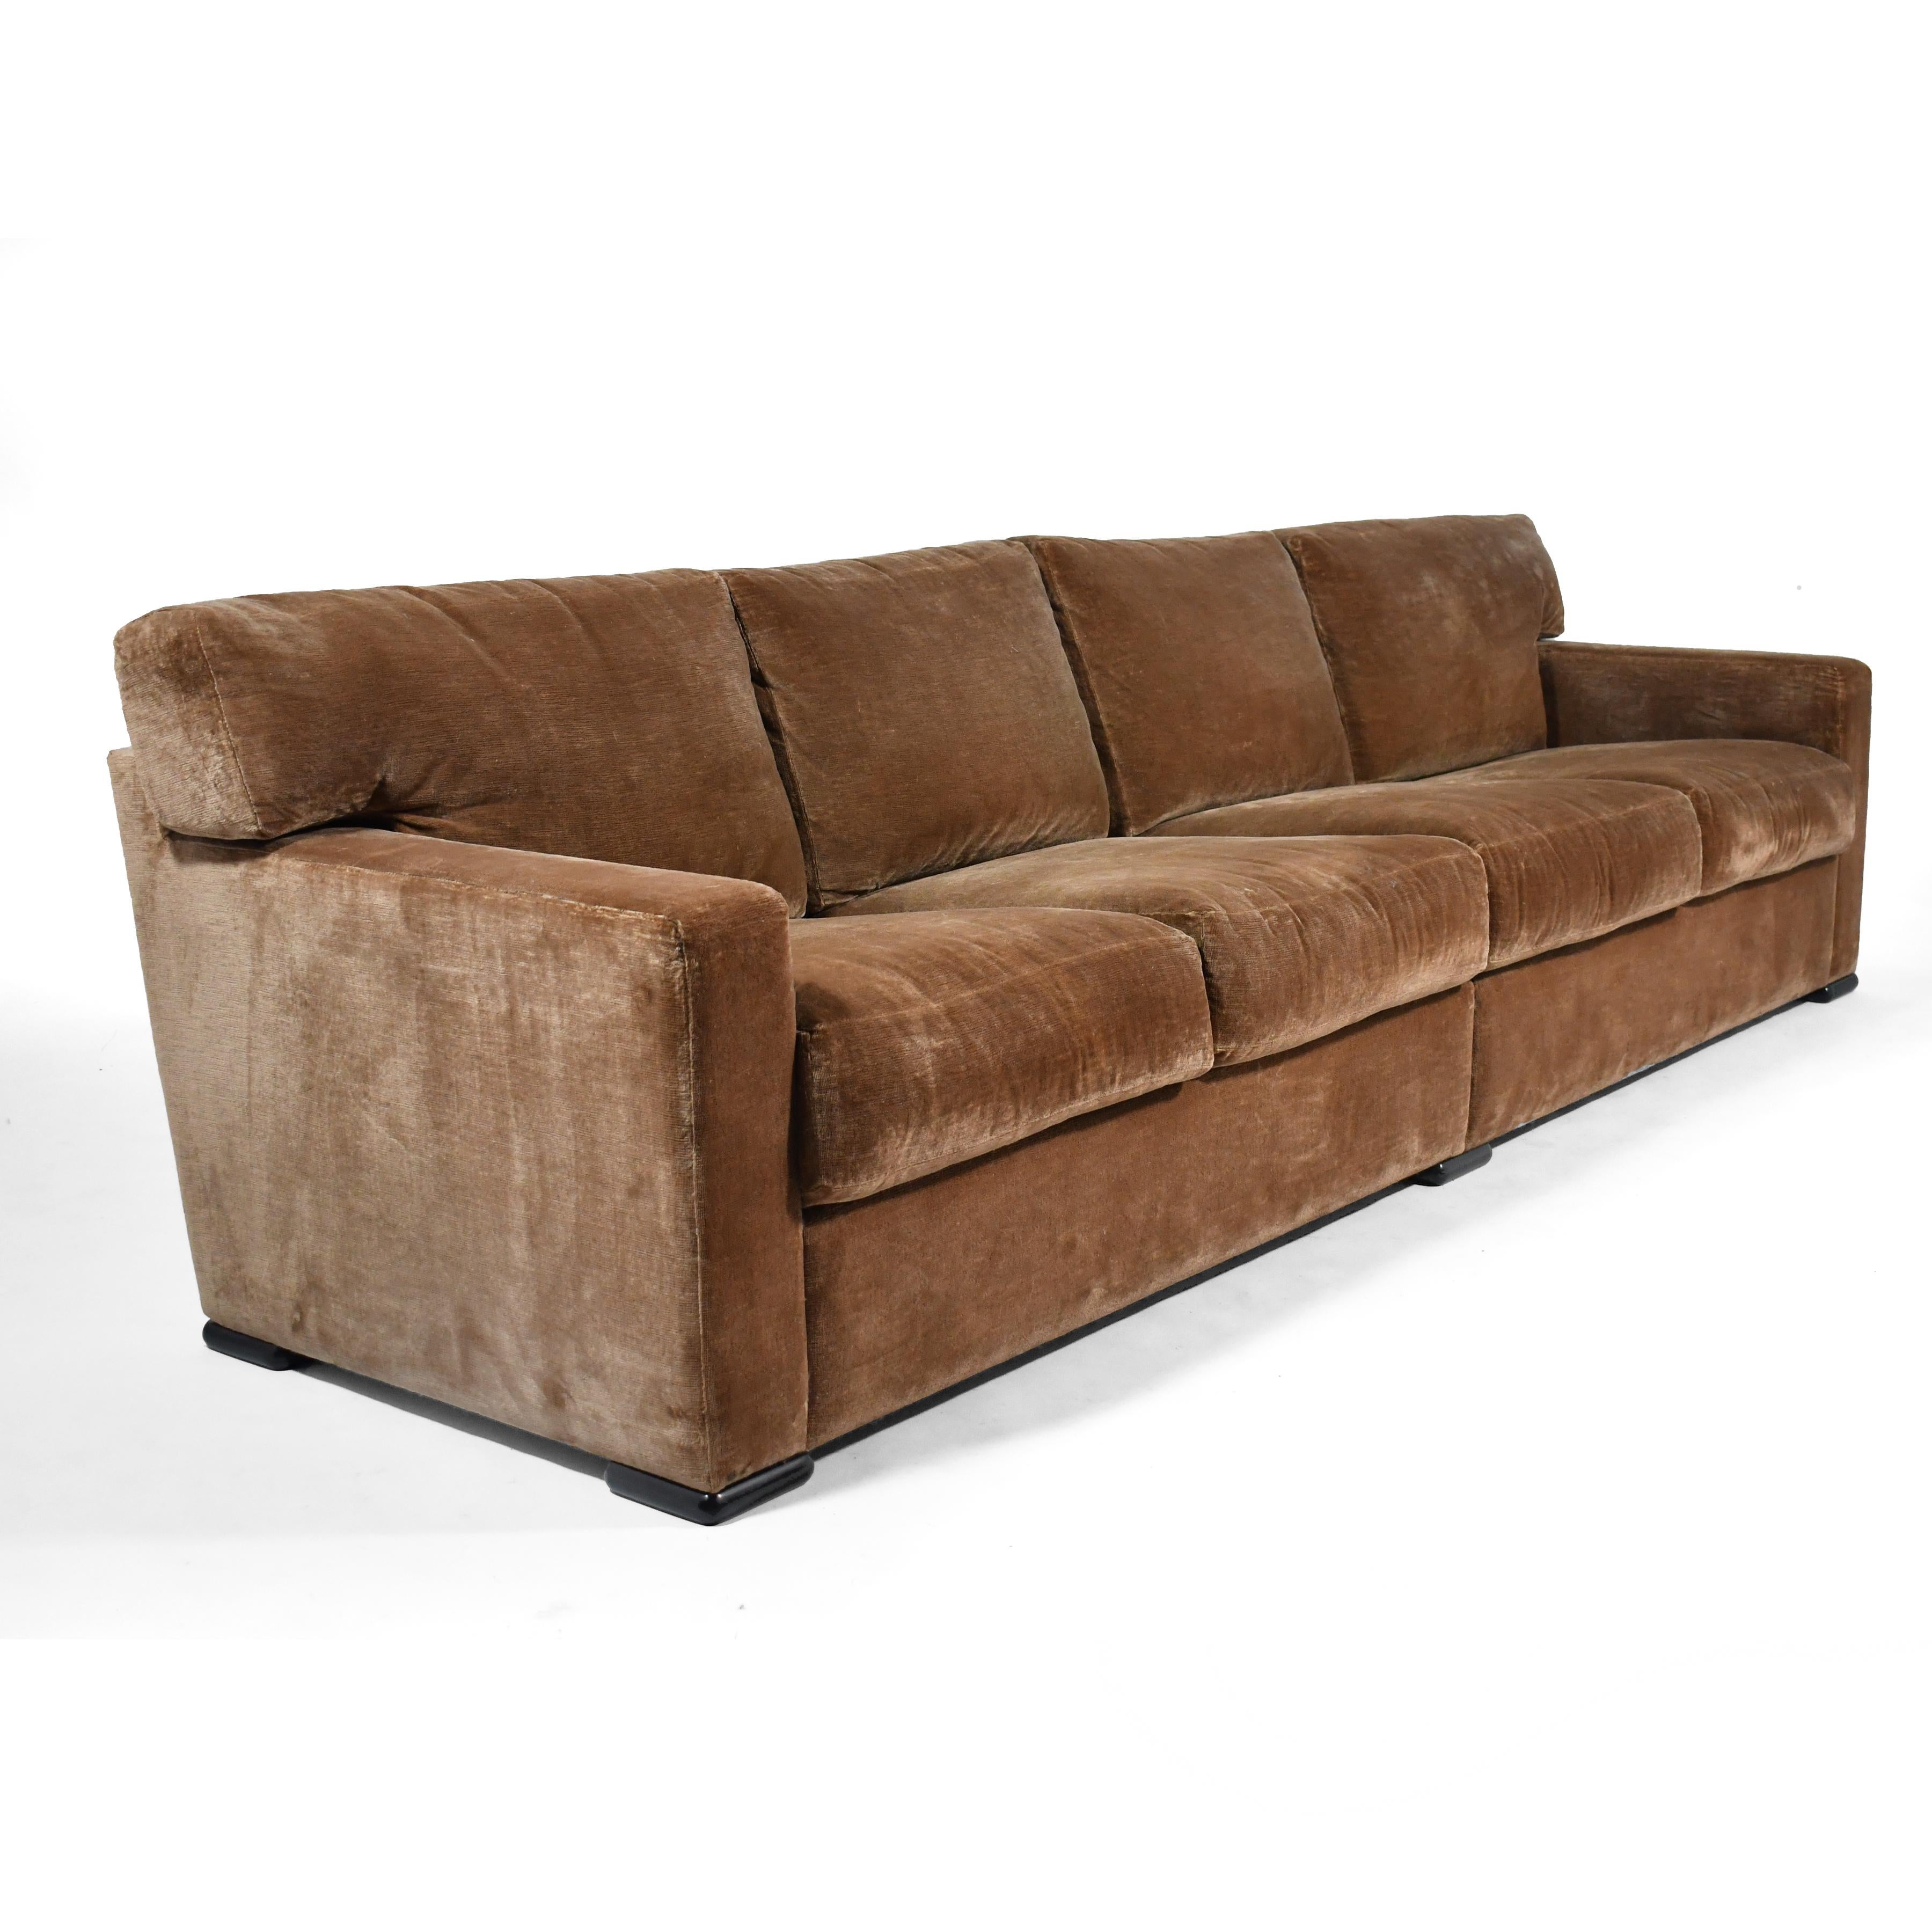 A classically designed and proportioned sofa, the stately 